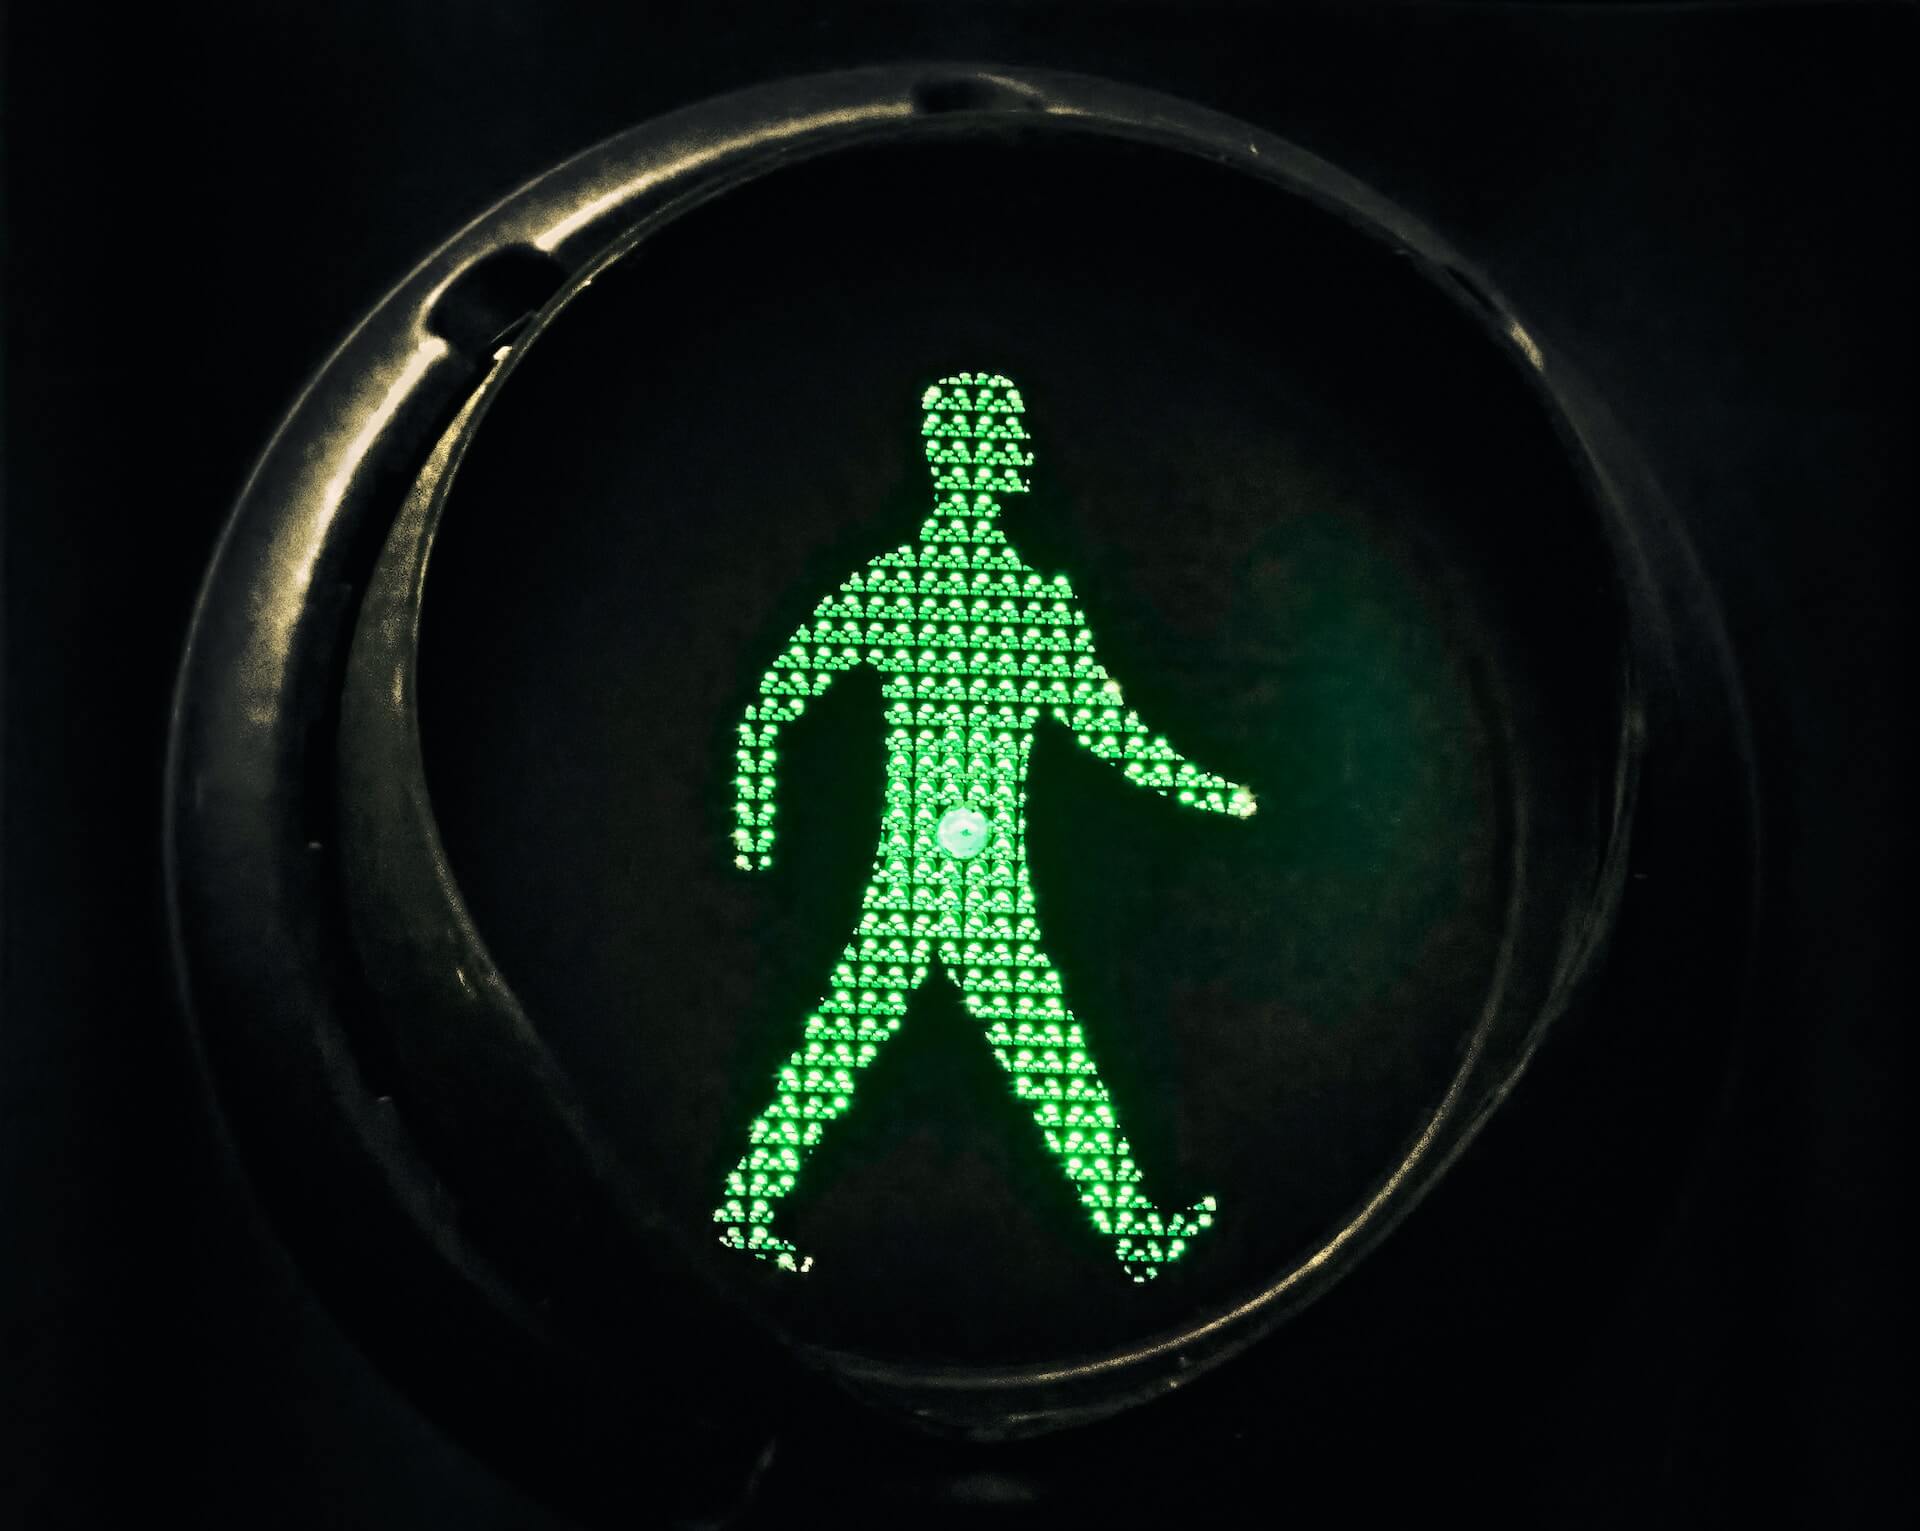 A signal indicating it is safe for a pedestrian to cross a road